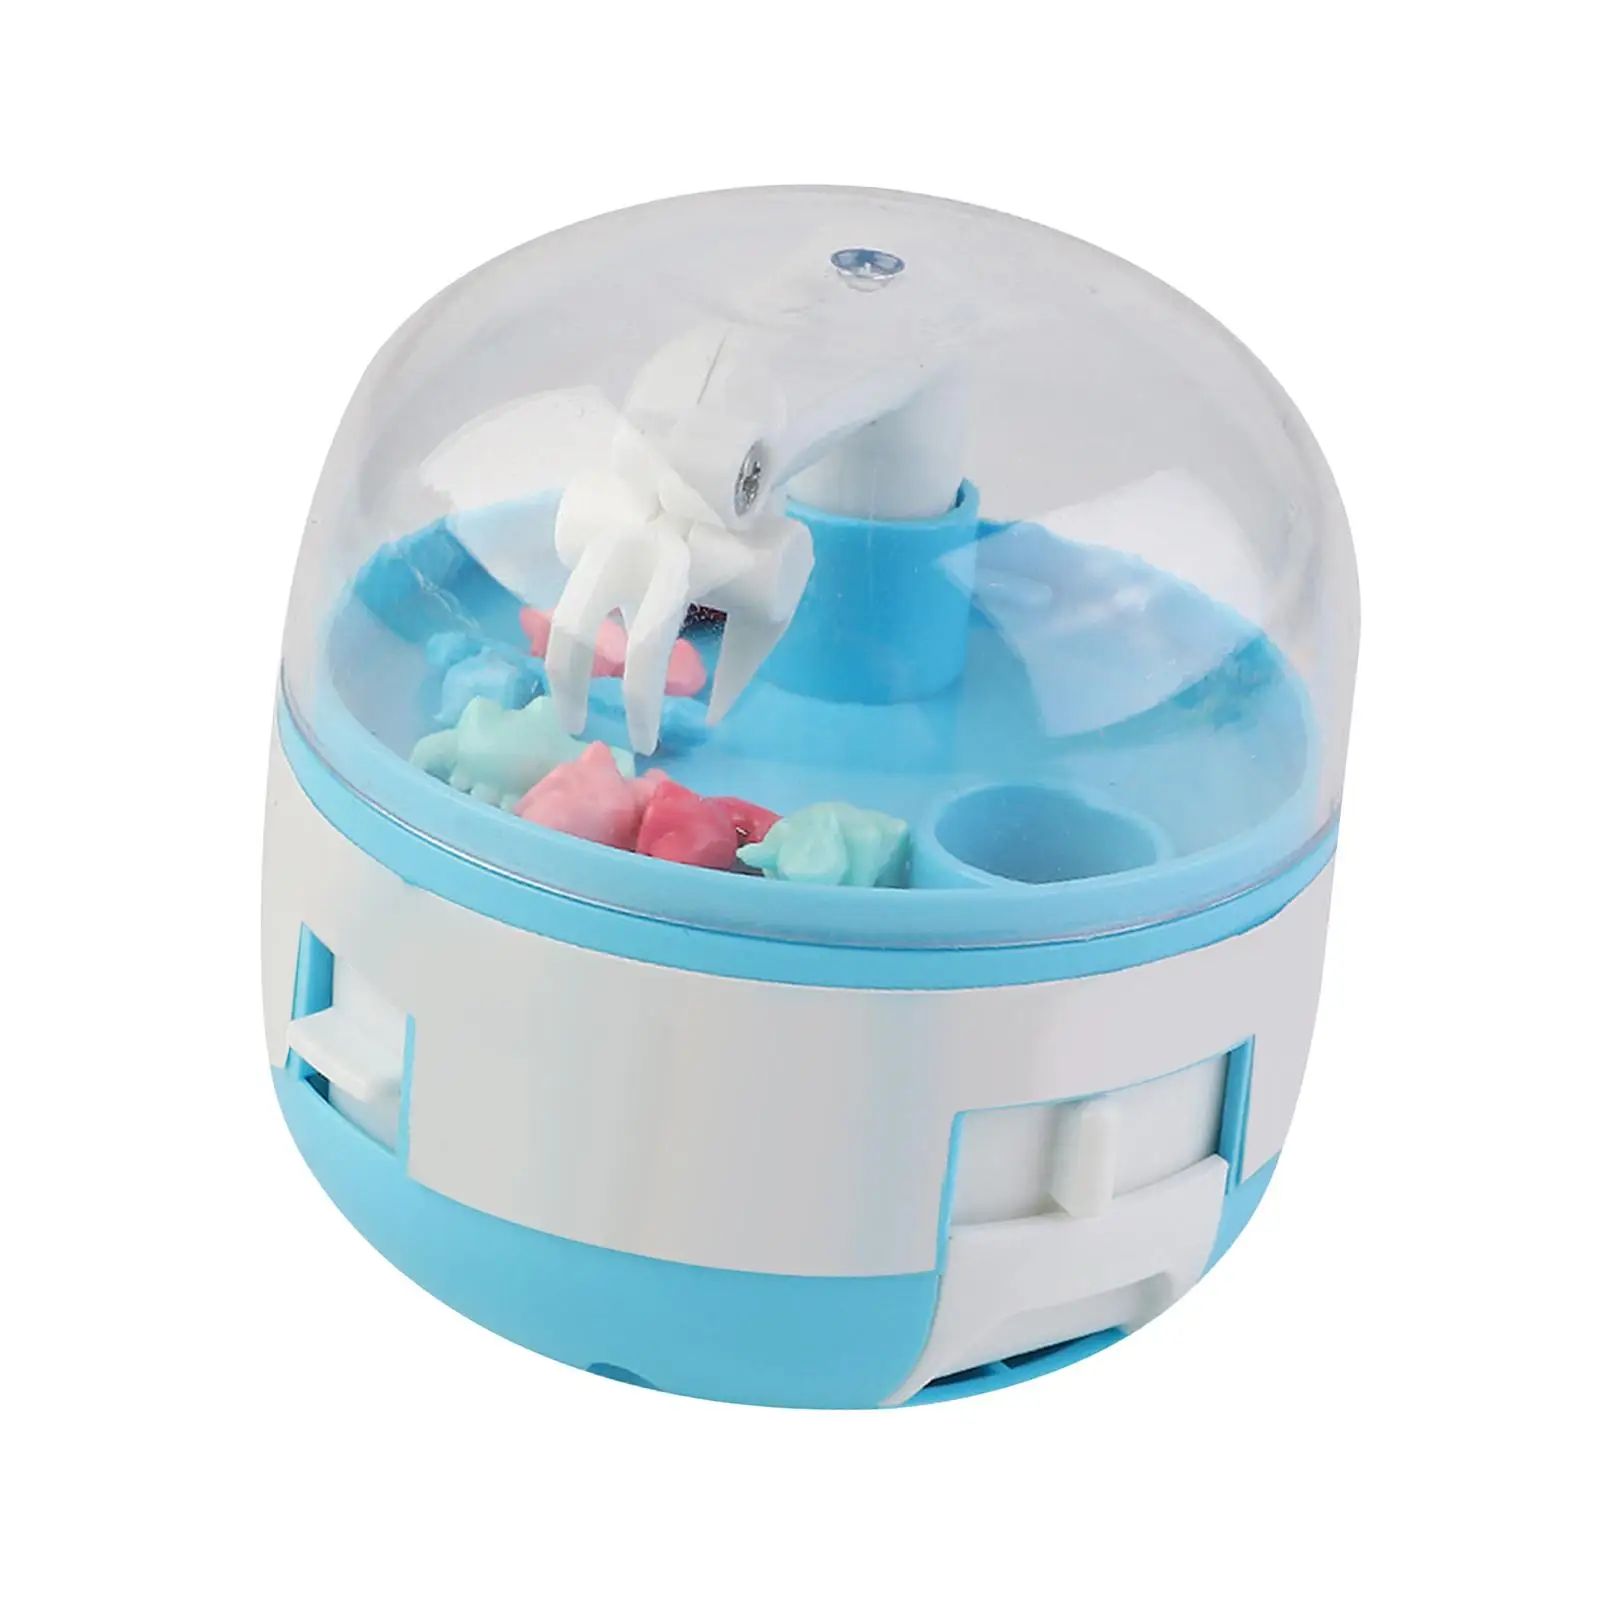 Toys Capsule Catcher Grabber Fingertip Toys Miniature Education Machine Claw Toys for Game Birthday Party Boys Prizes